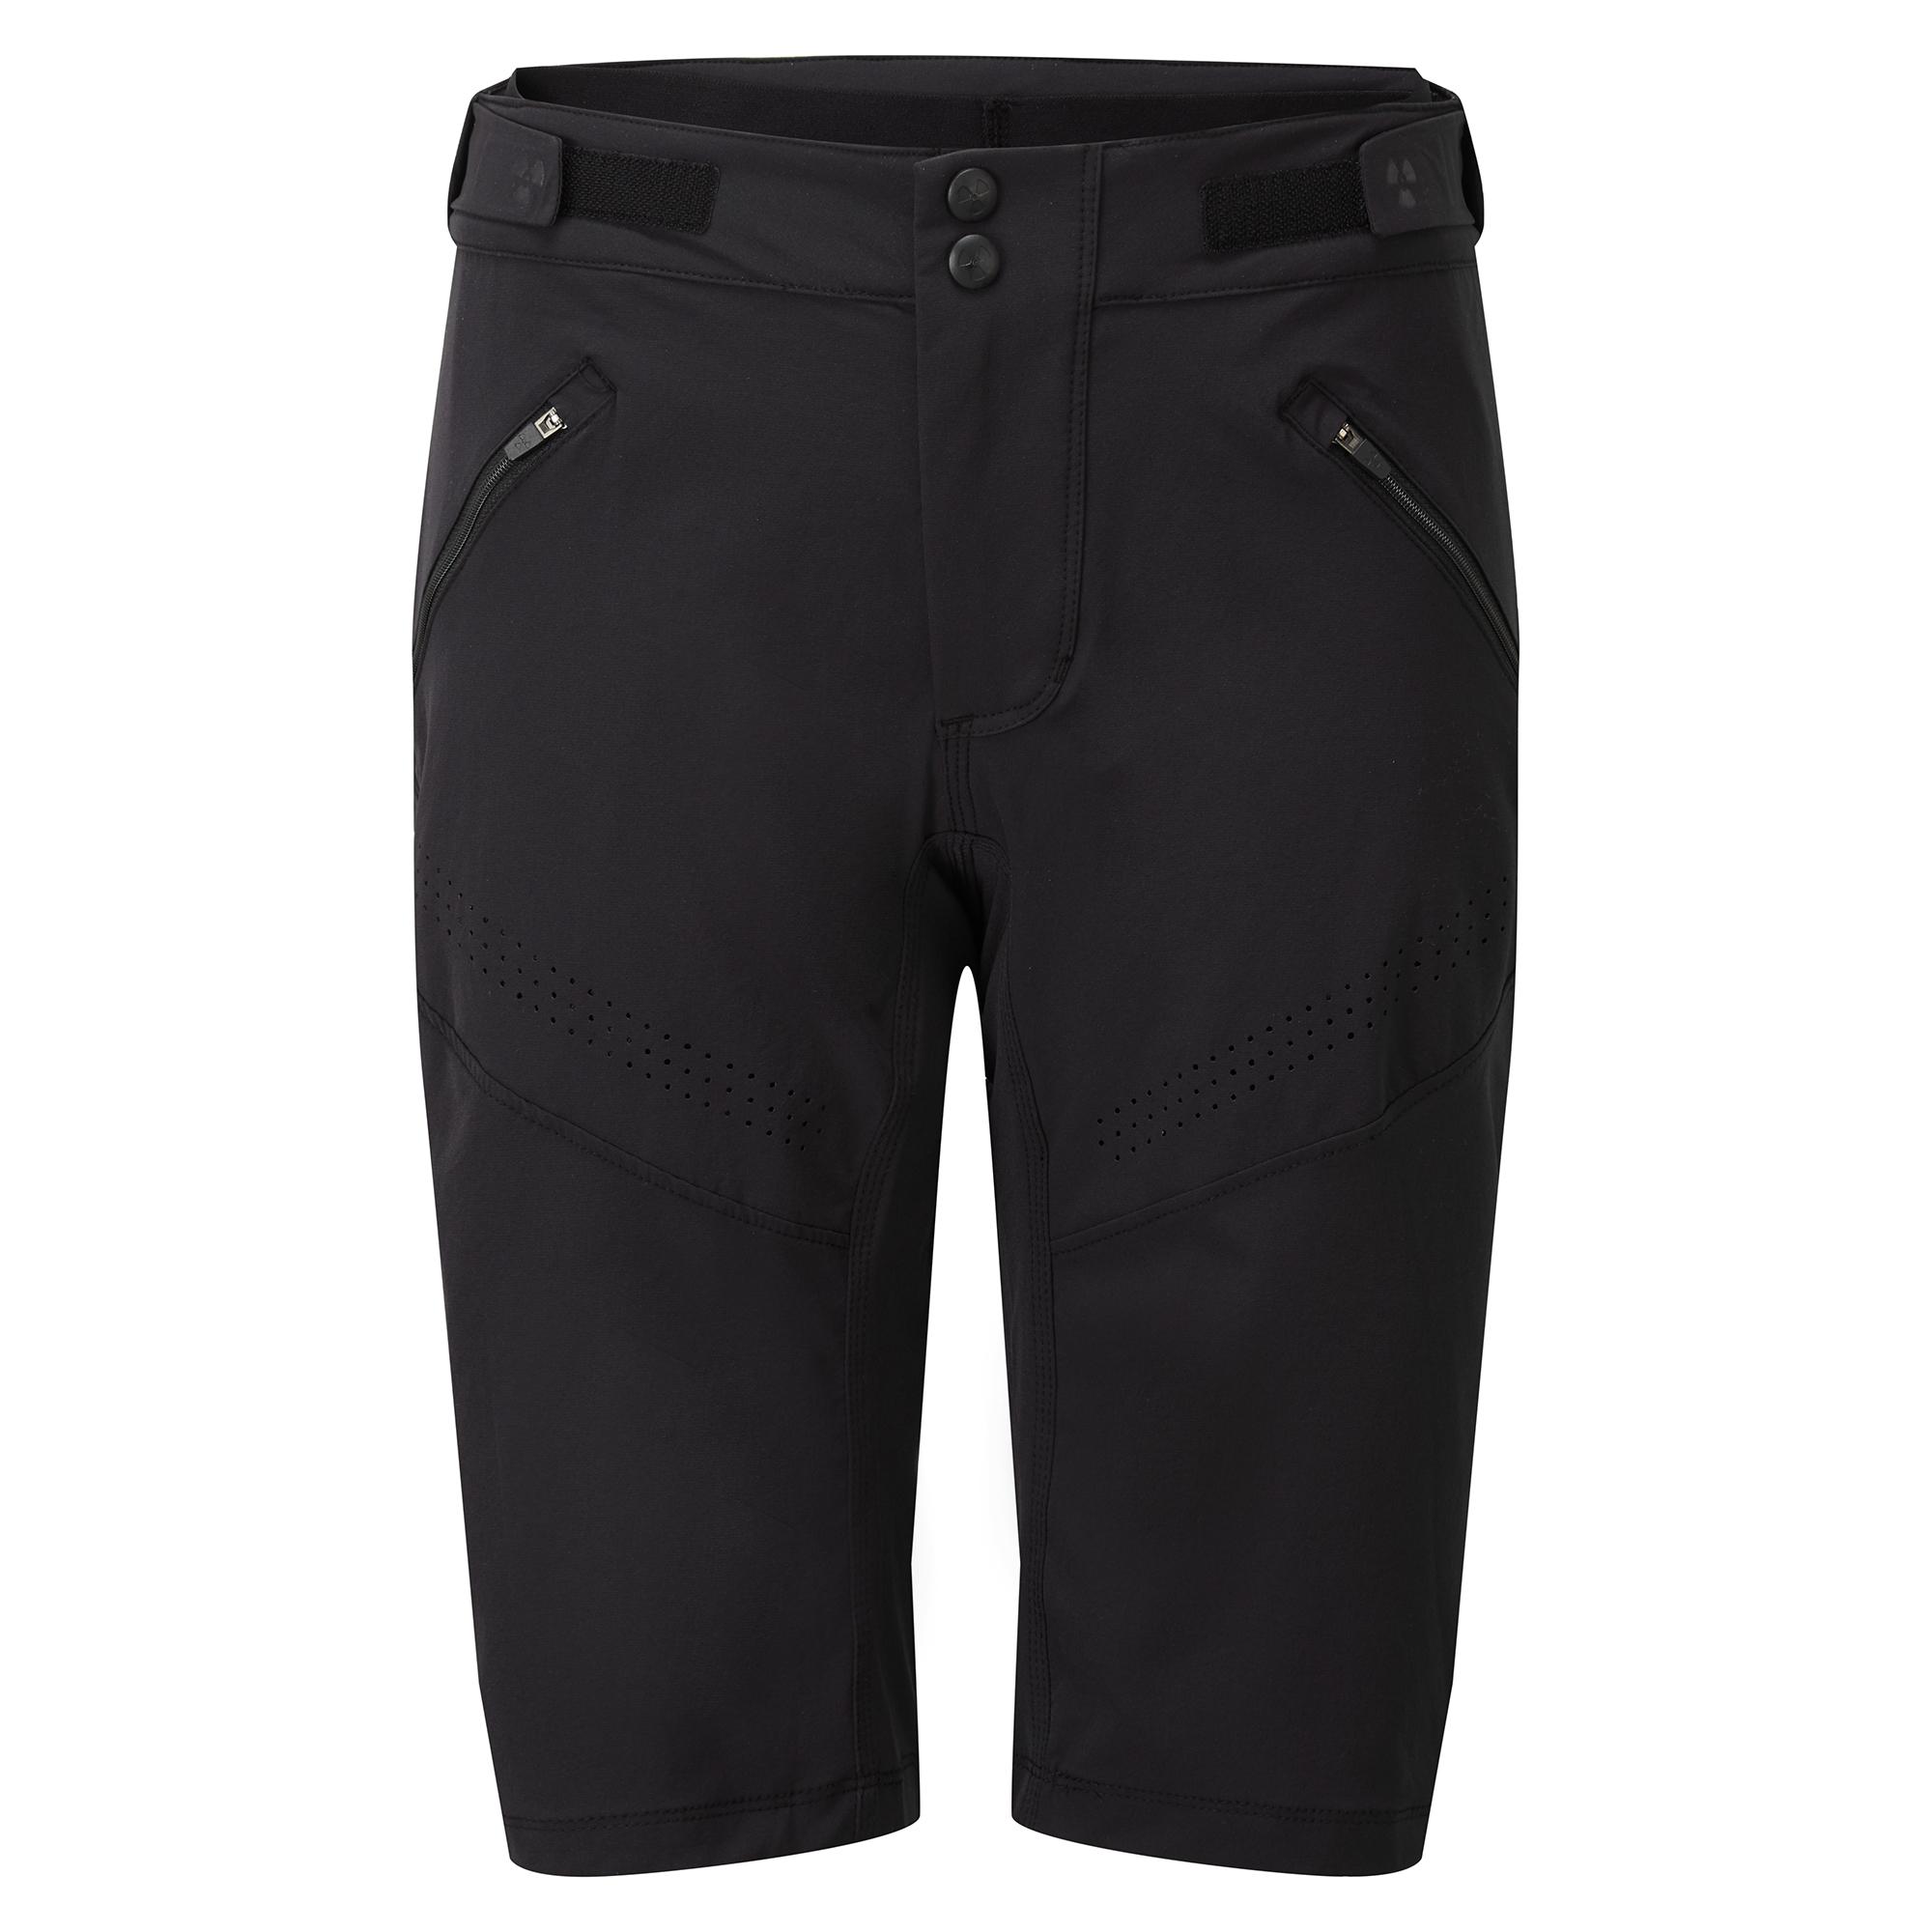 Nukeproof Blackline Womens Shorts With Liner